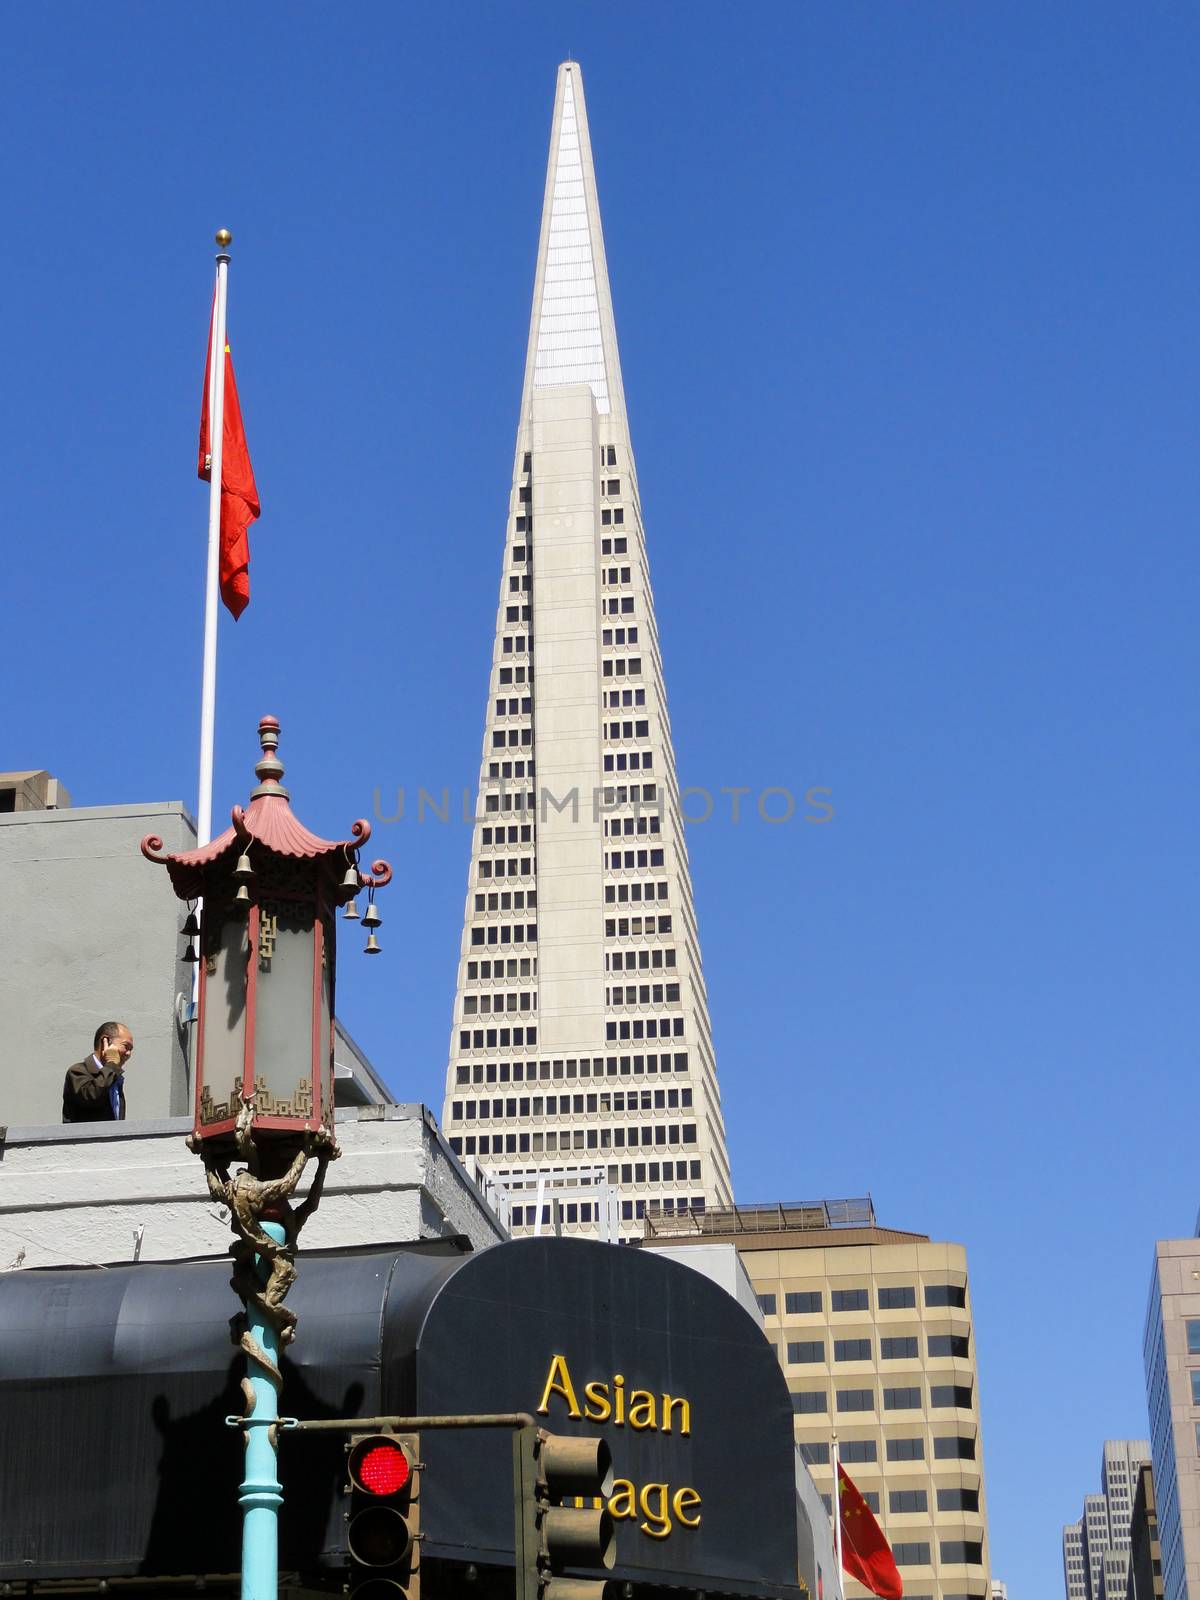 San Francisco, USA - July 23 2010: Transamerica Pyramid Building in the Background. A View From San Francisco Chinatown, California